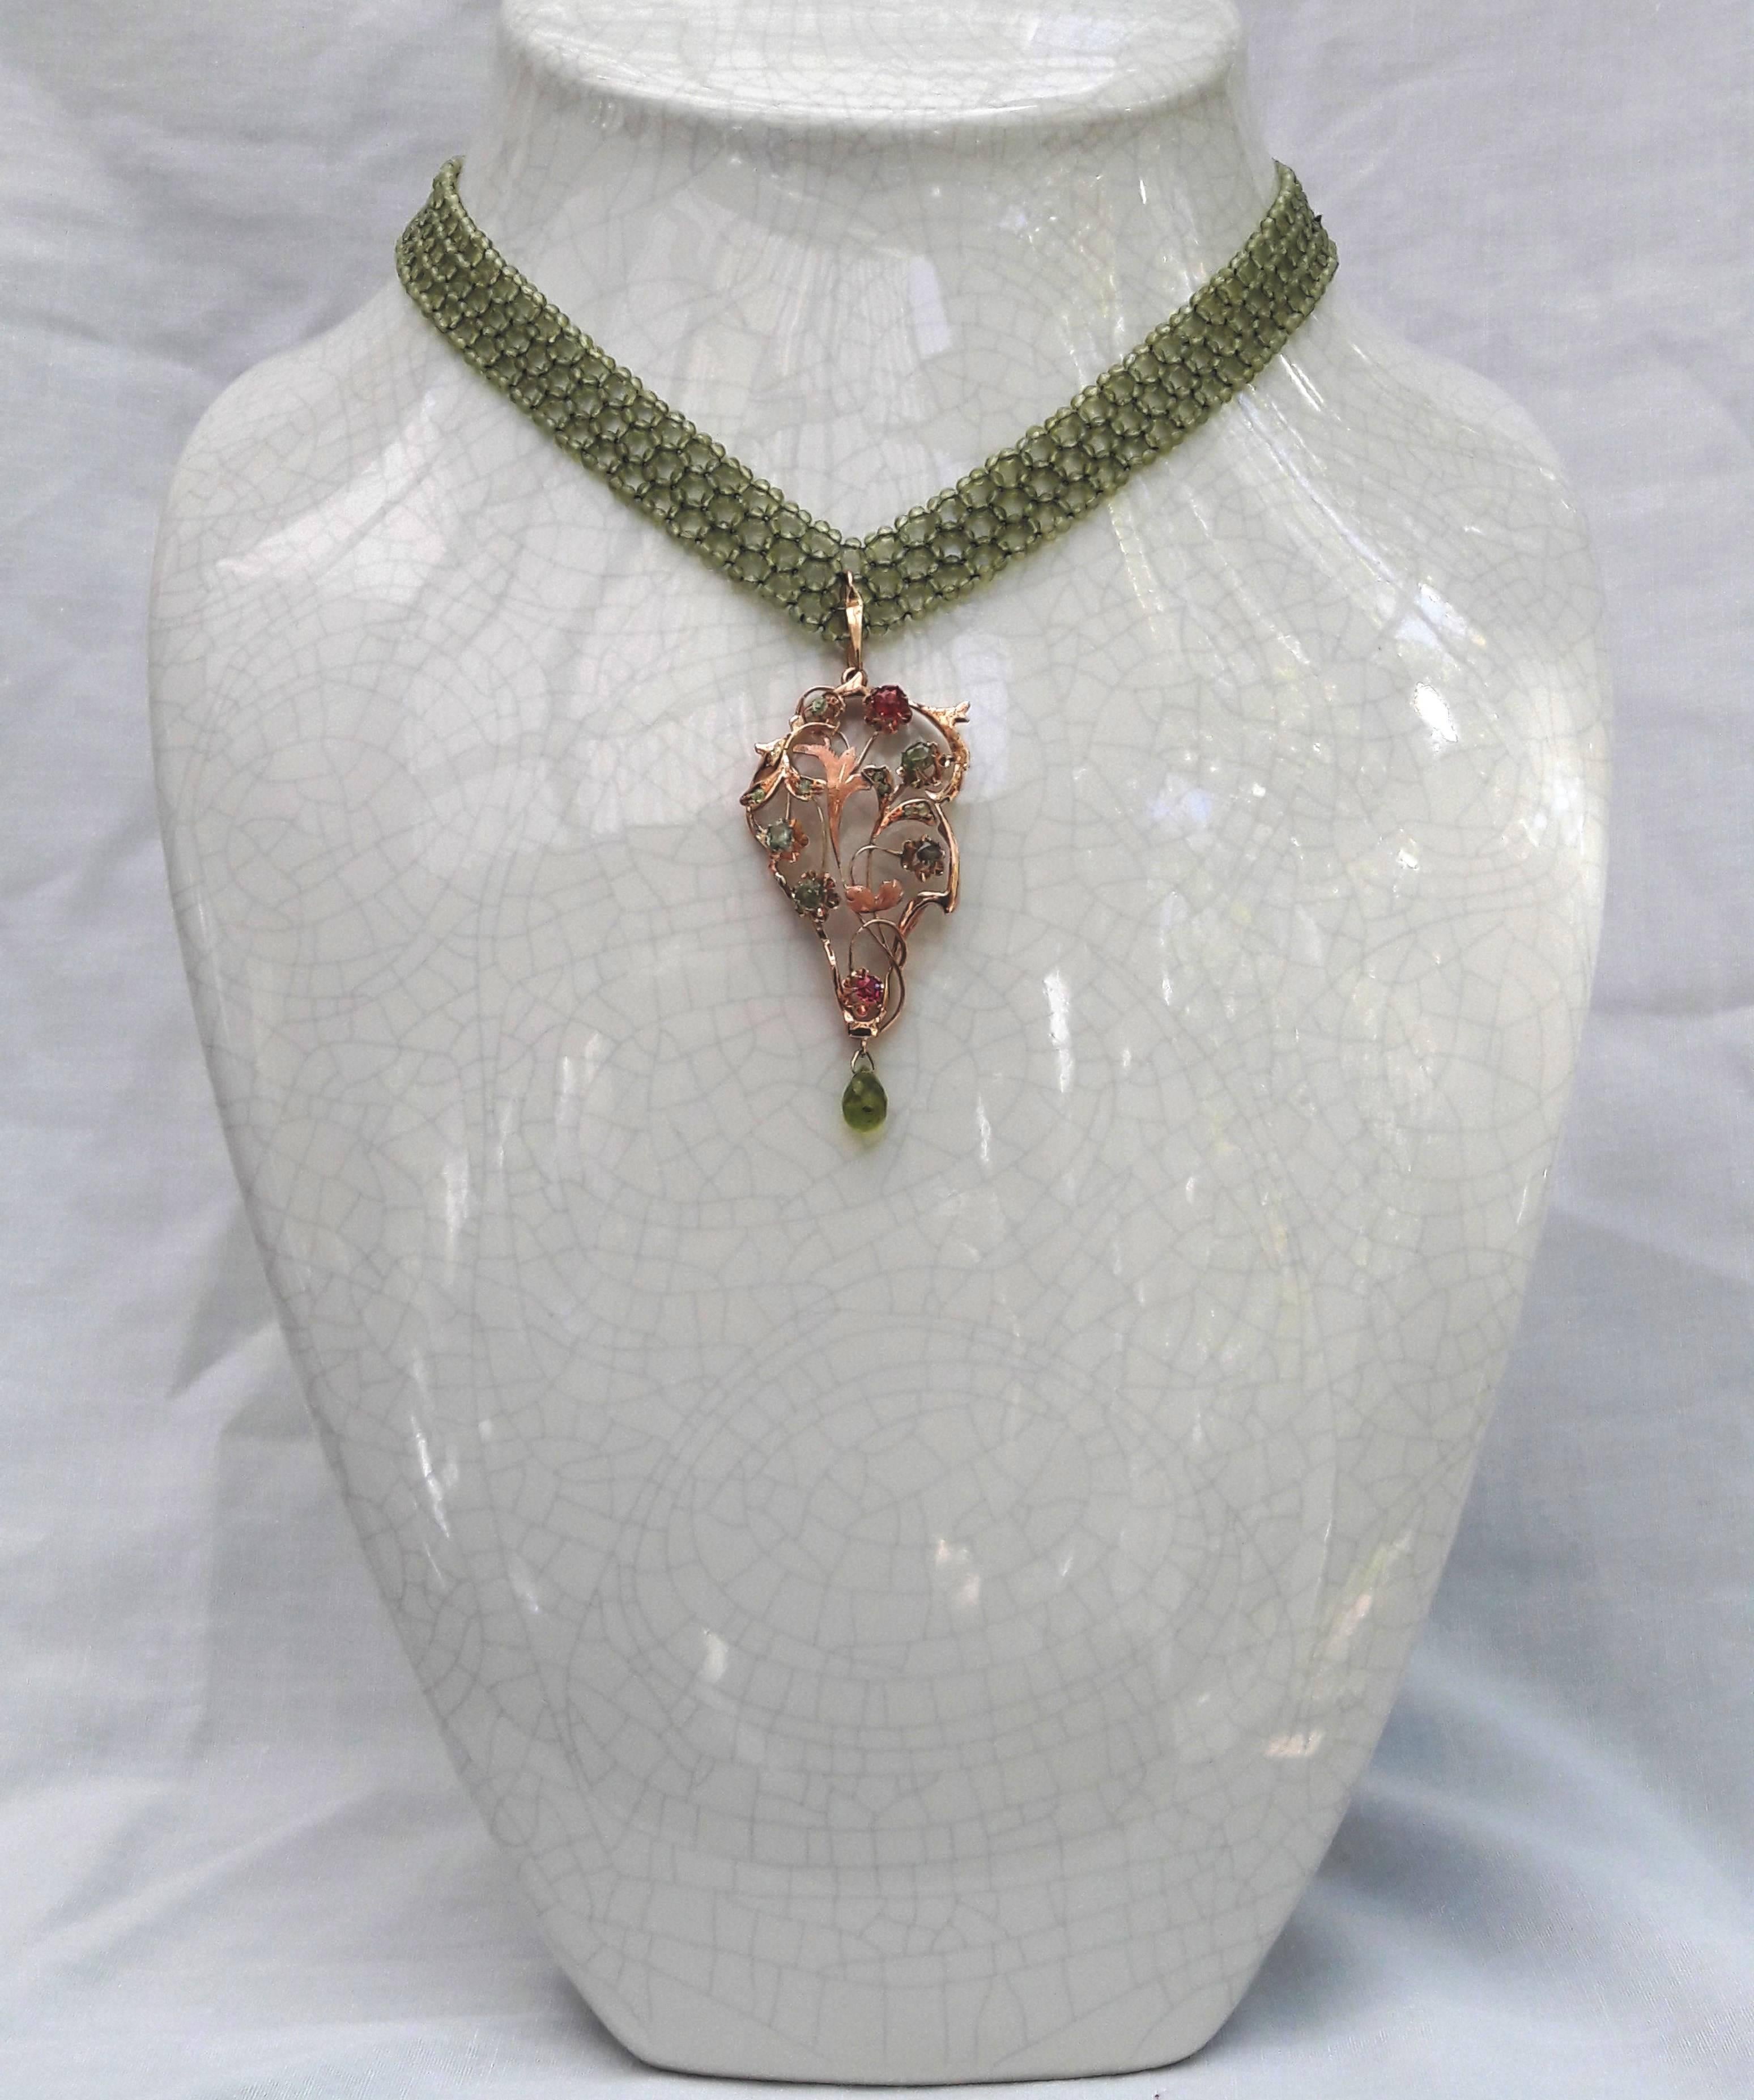 The necklace is composed of fine and faceted 1.5 mm Peridot beads, and woven into a flat, v-shape ribbon. Suspended in the center is a vintage 14 k yellow gold removable pendant, exquisitely detailed in a floral motif and glistening with faceted